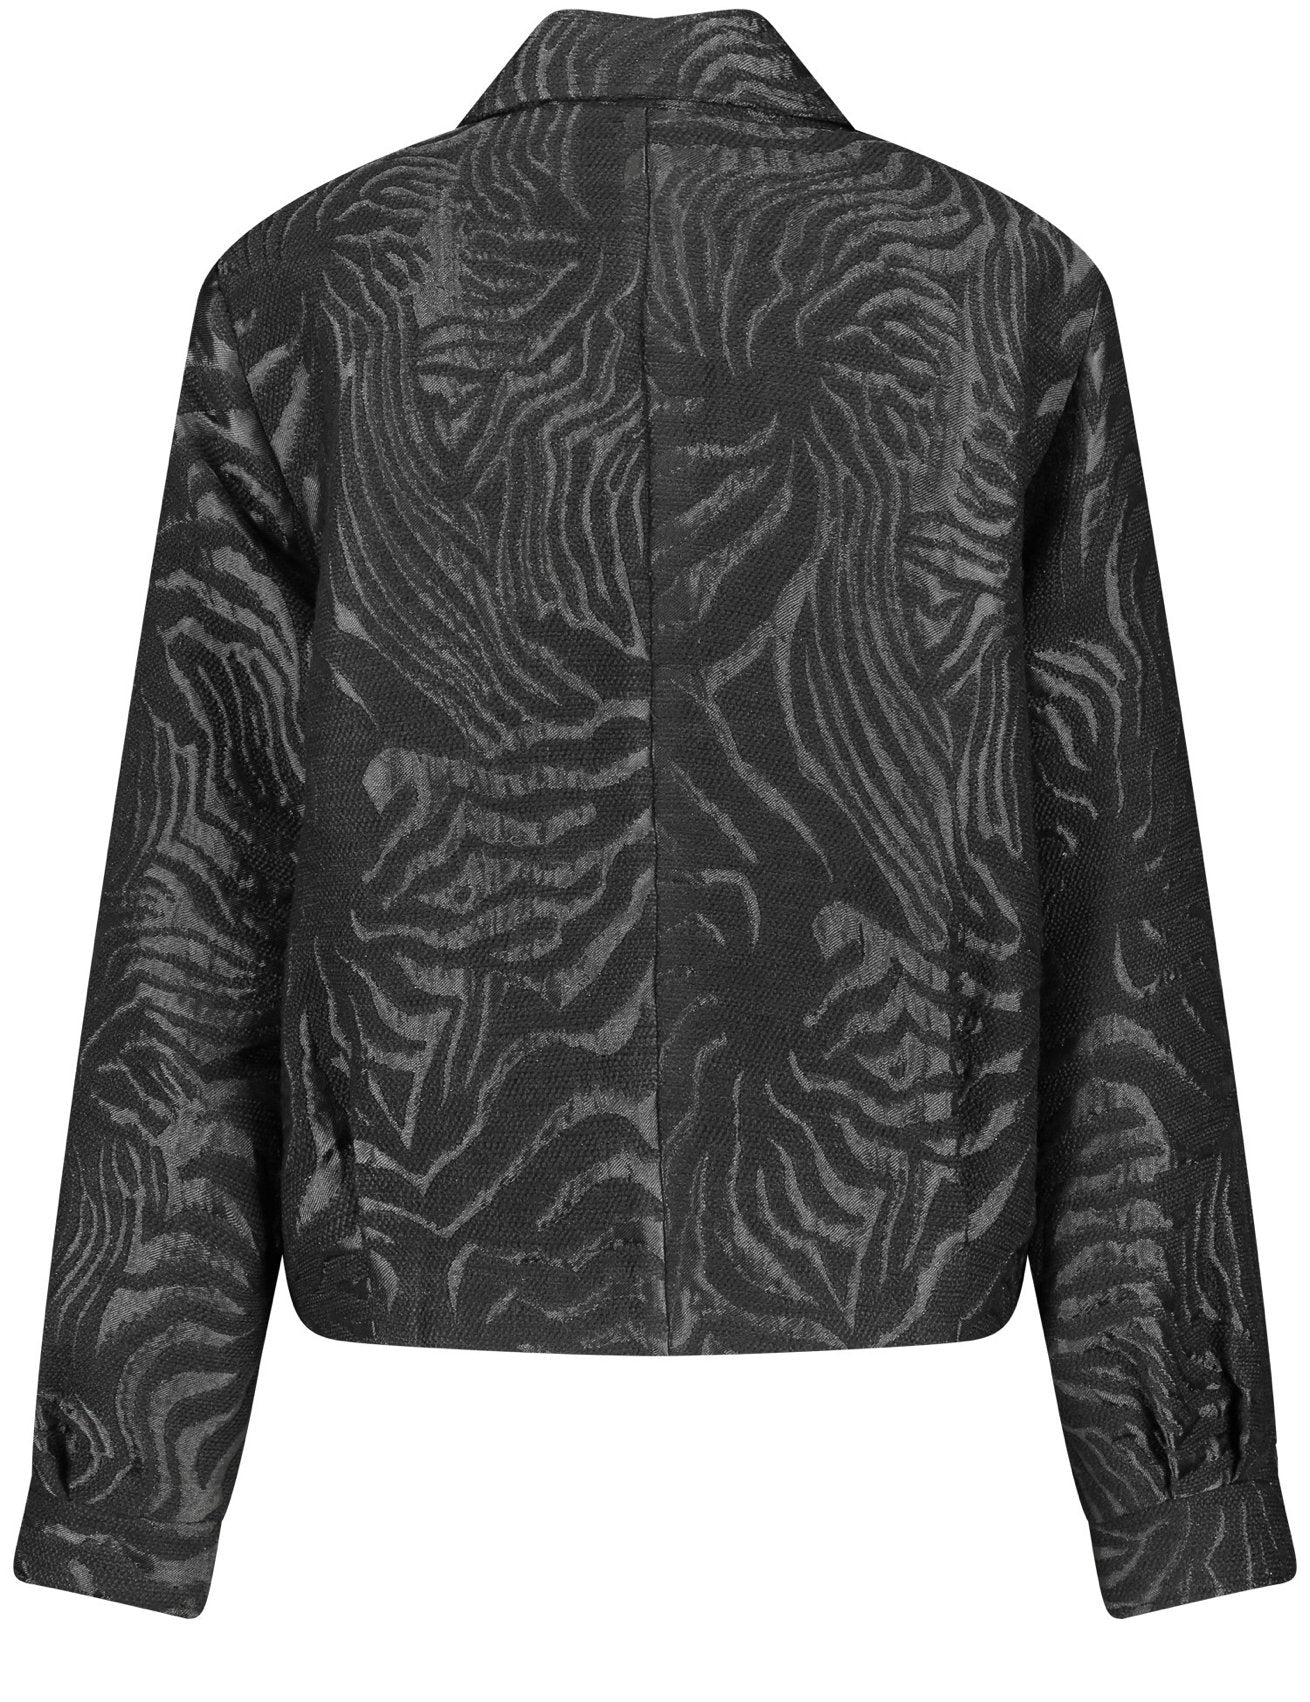 Blazer Jacket With A Jacquard Pattern And Collar_230060-31228_11000_03